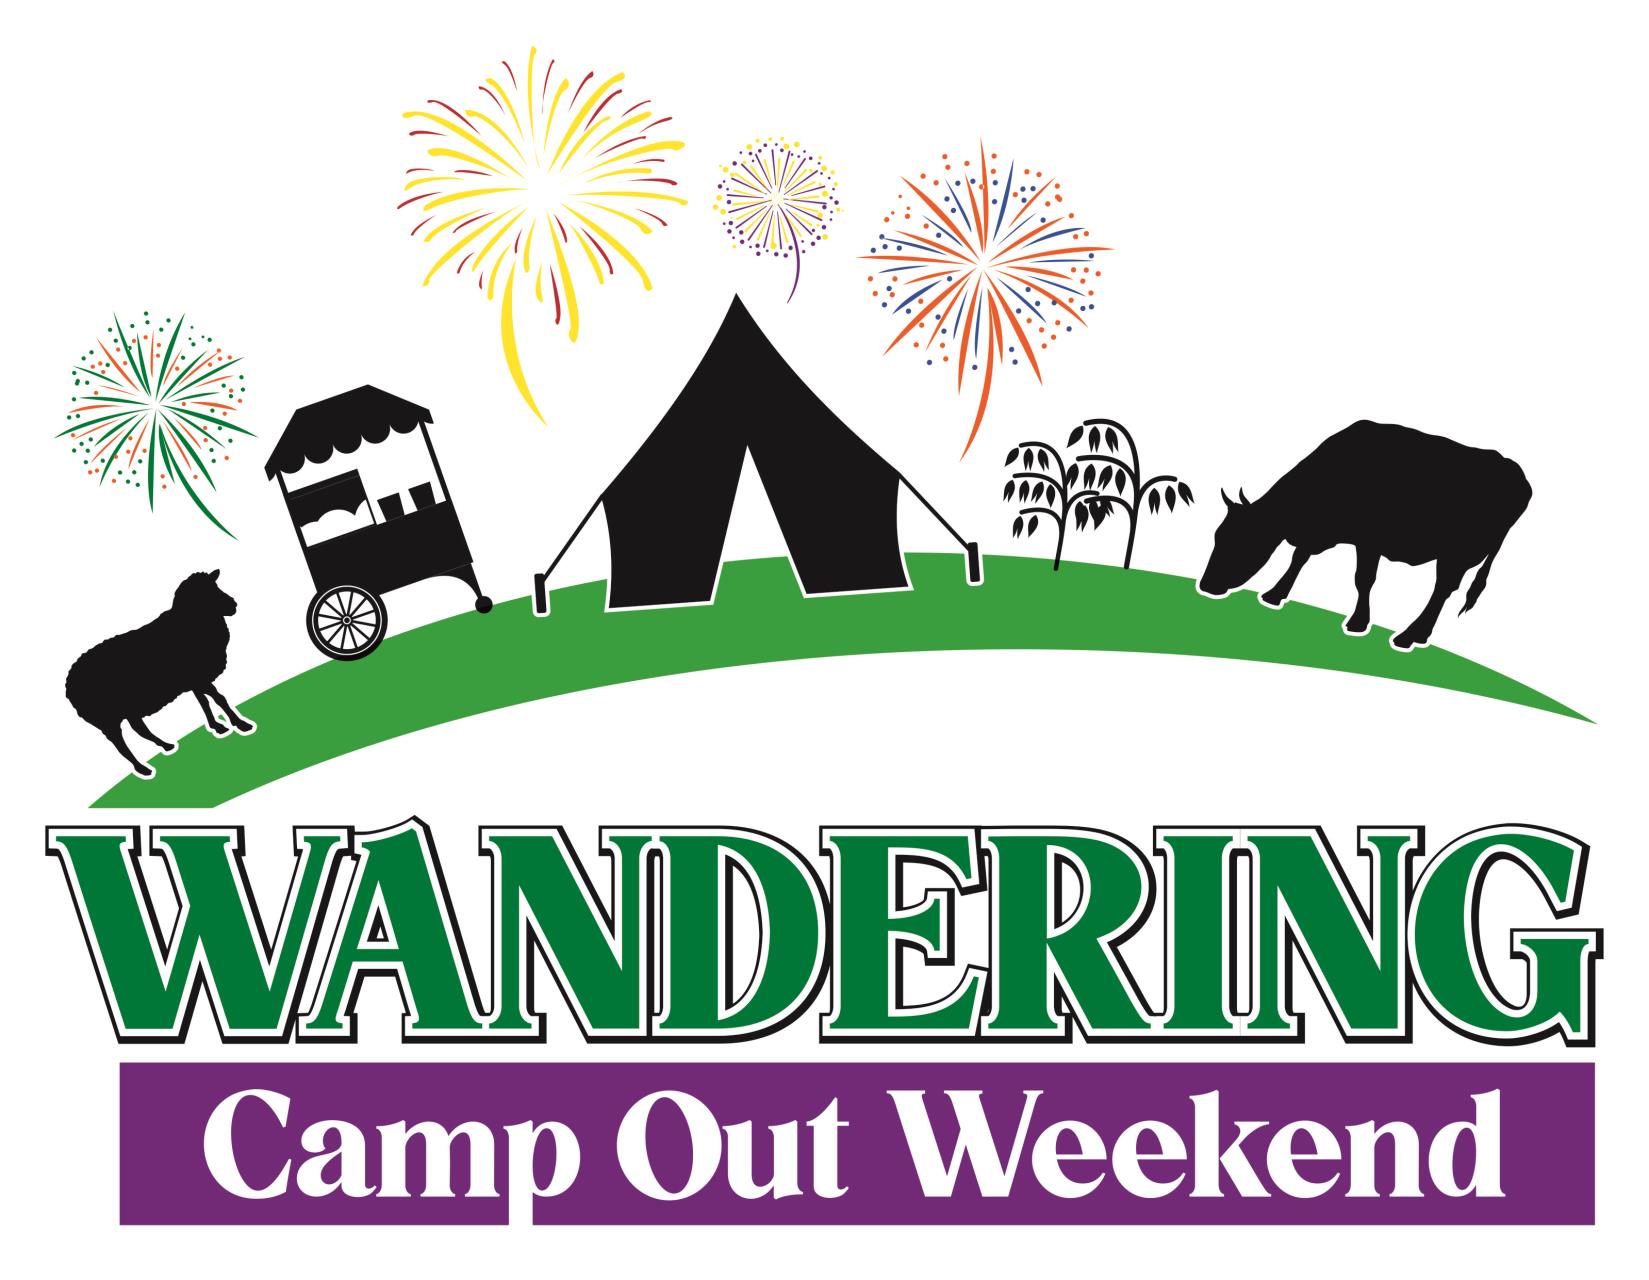 Wandering Fair and Campout Weekend